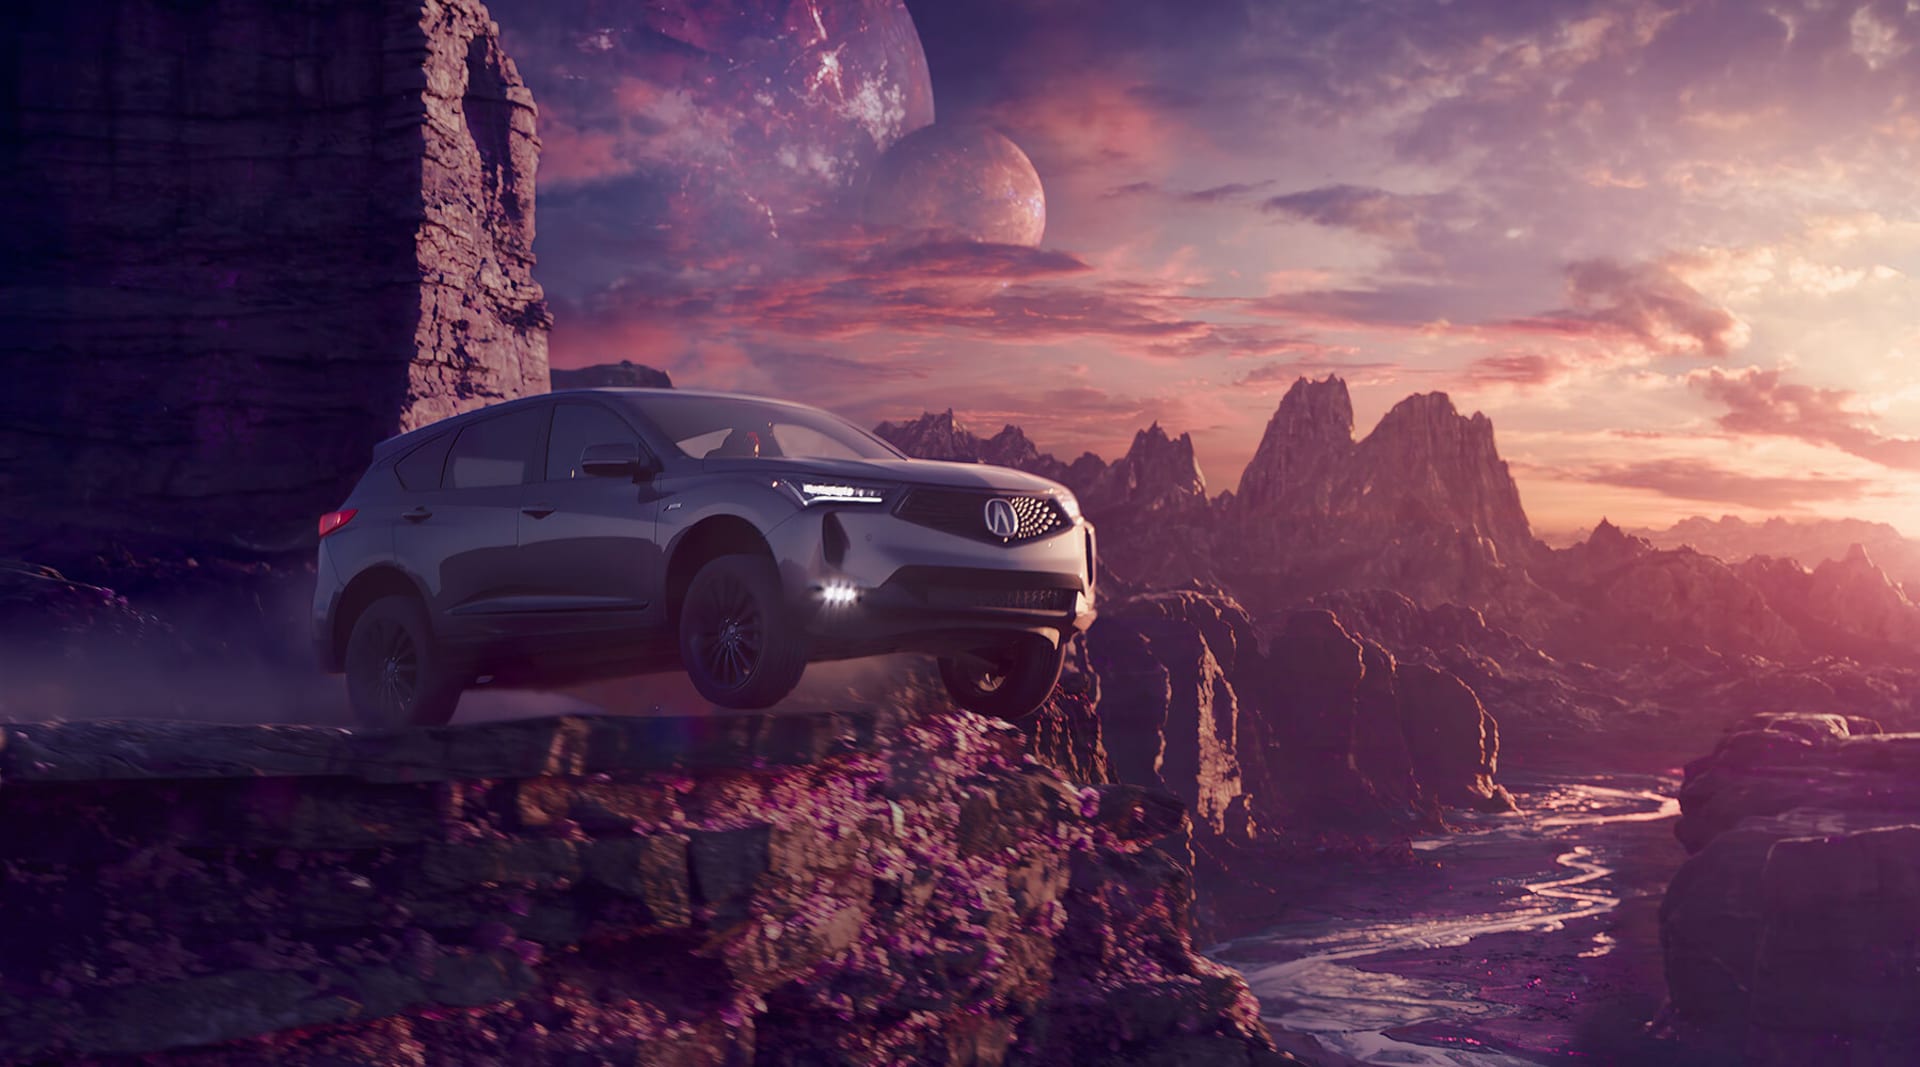 A silver car is parked on a cliff, with a pink sunset background.